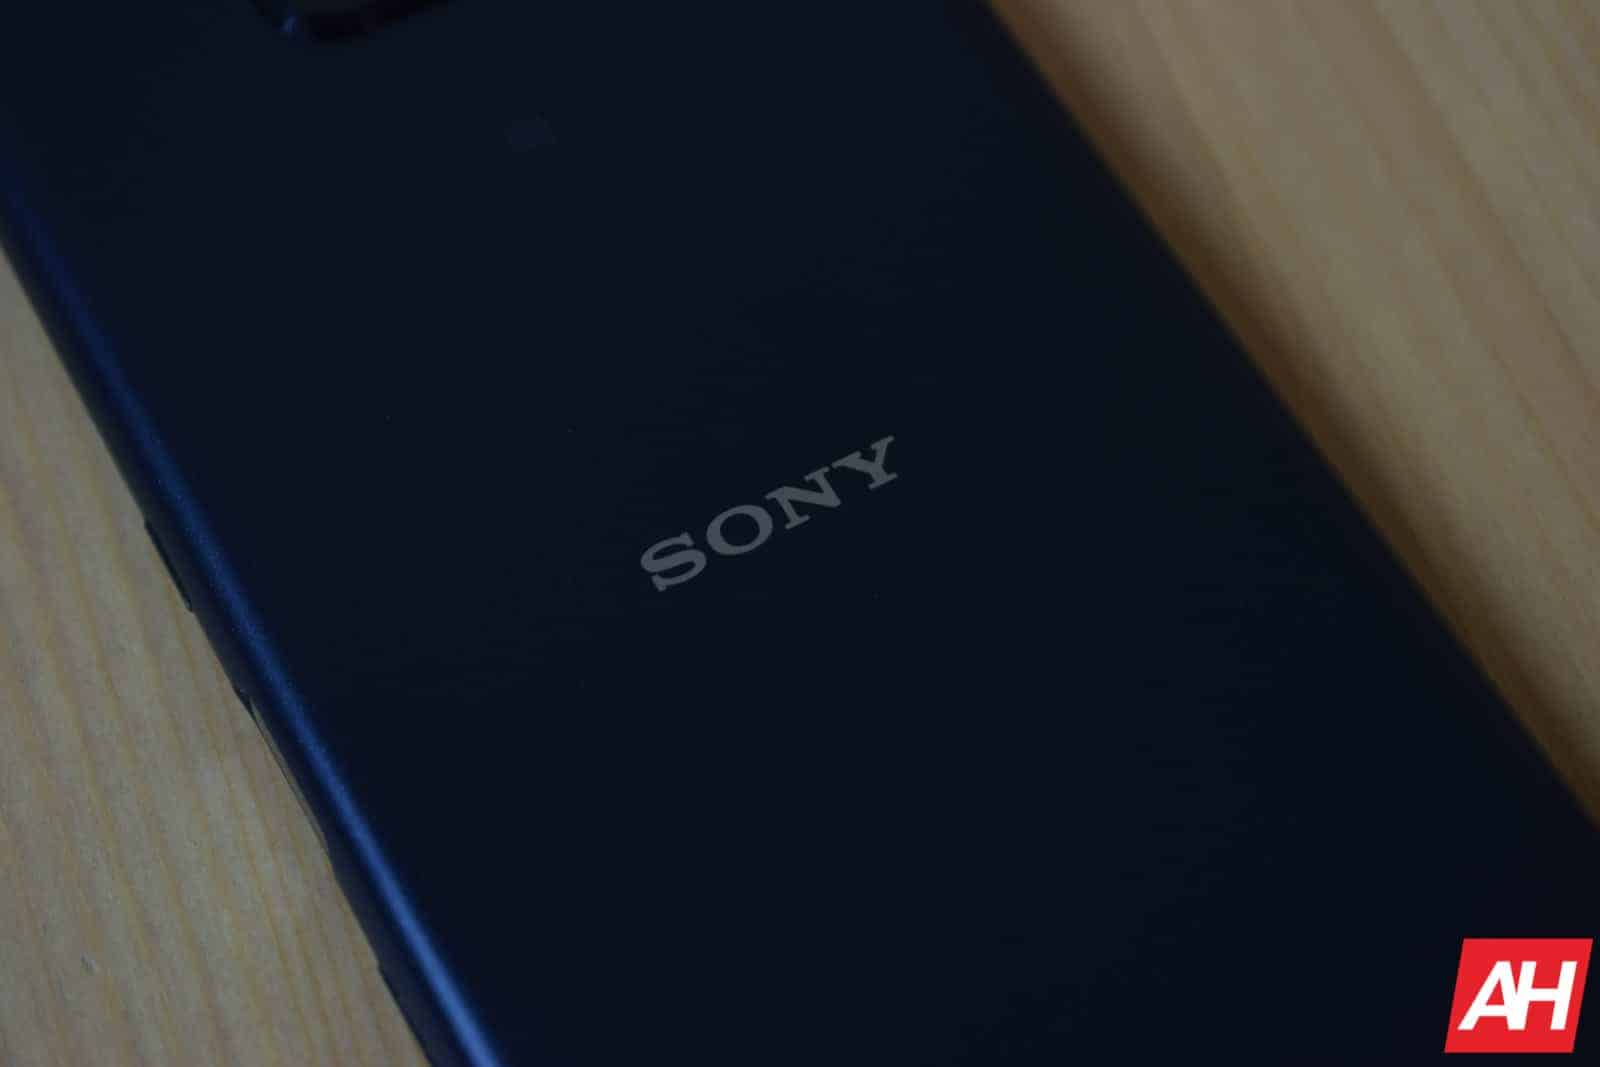 Sony Commits to Multi-Year Deal with Qualcomm, Set to Revolutionize Future Smartphone Industry 15